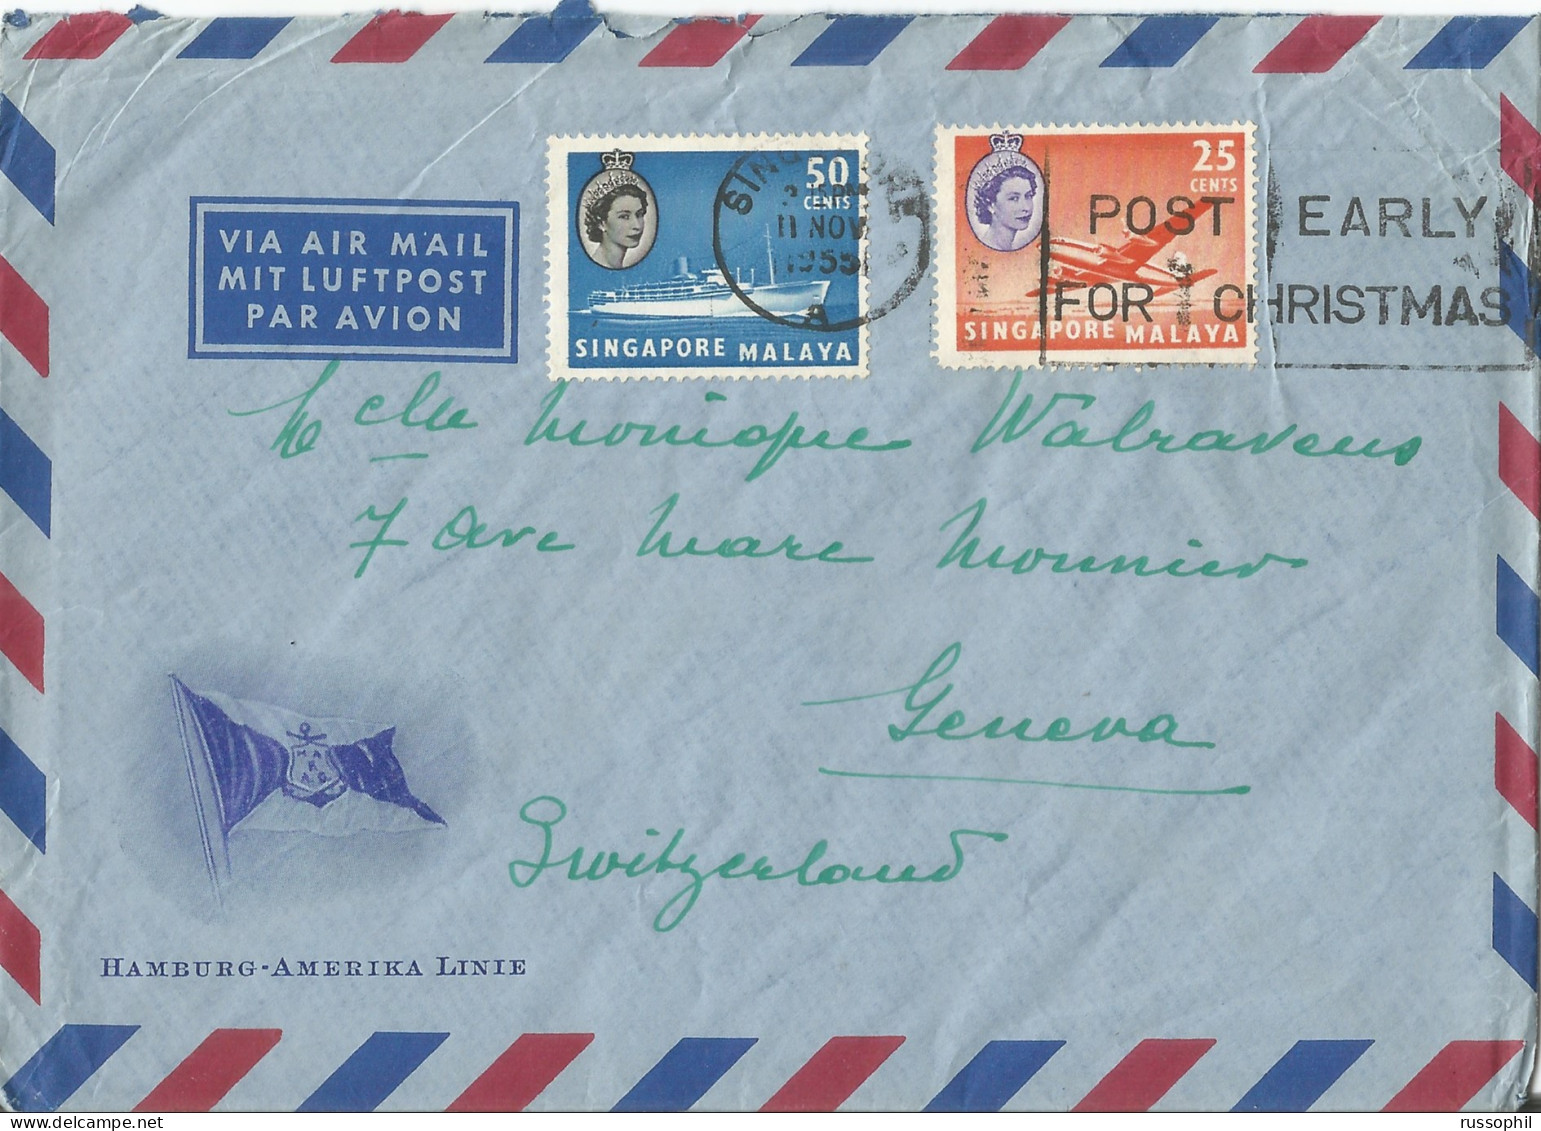 HAMBURG AMERIKA LINIE - CARGO PASSENGER "HAMBURG" - BRIEF WITH CONTENT POSTED DURING STOPOVER IN SINGAPORE - 1955 - 1950 - ...